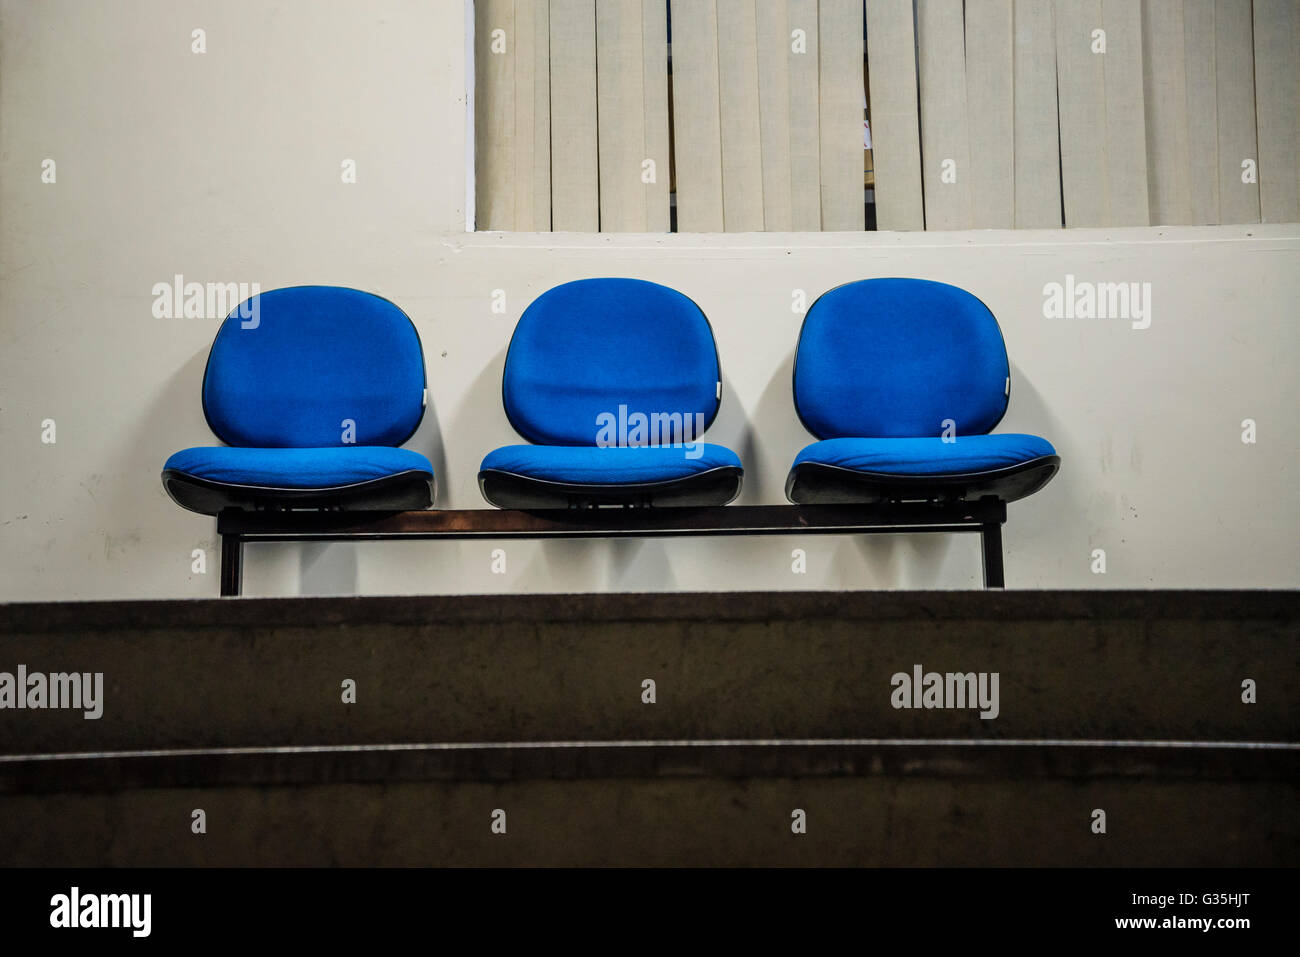 Three seats in a waiting room Stock Photo